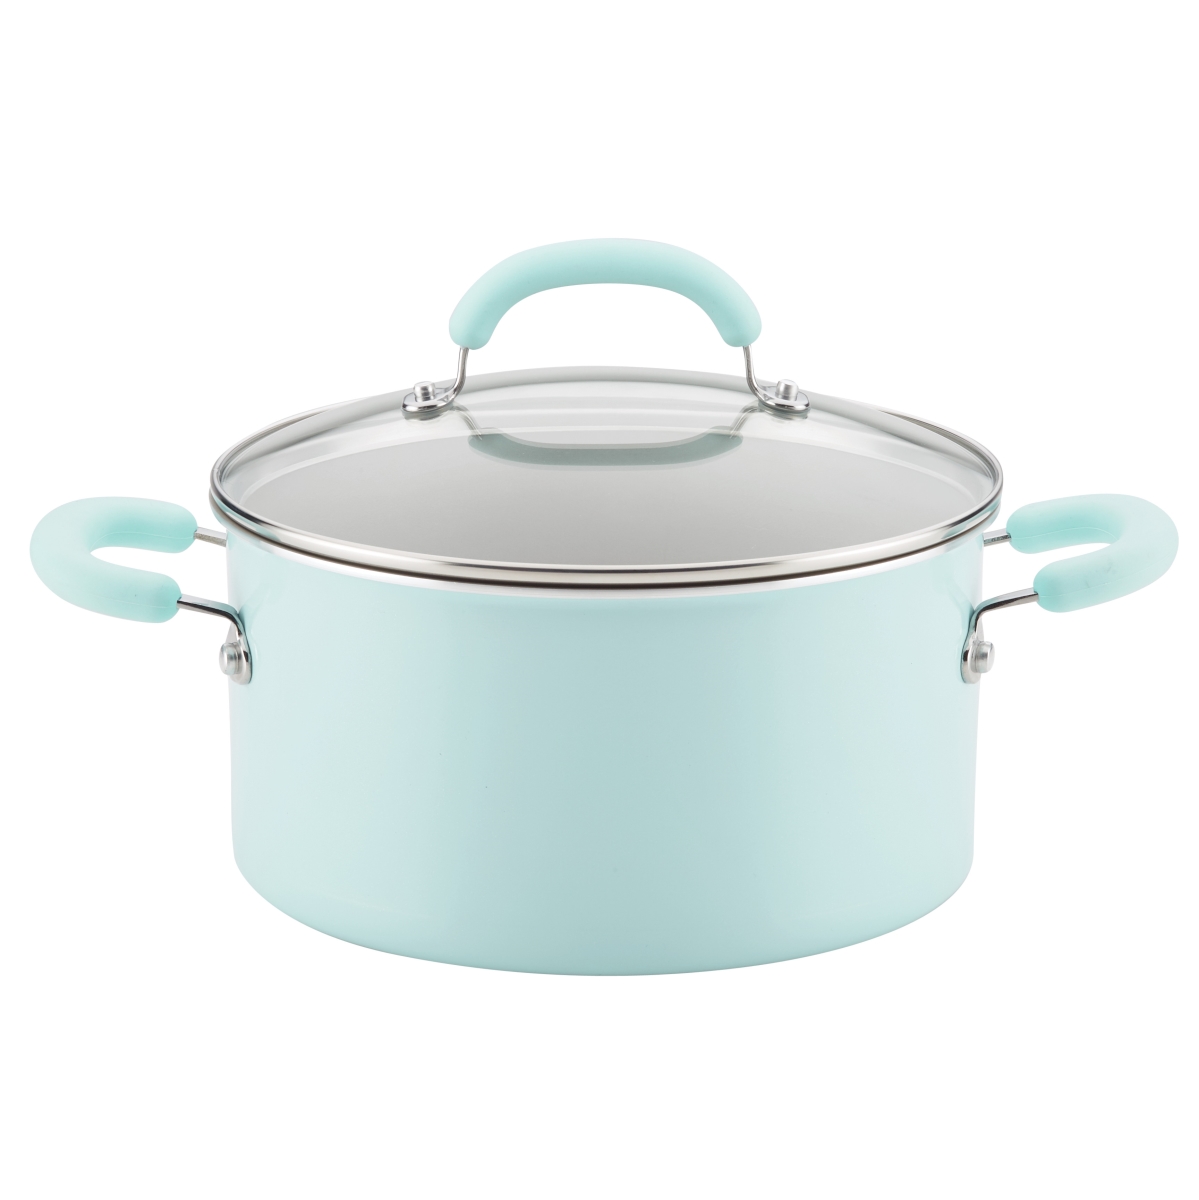 Picture of Rachael Ray 12165 6 qt. Create Delicious Aluminum Nonstick Stockpot - Light Blue Shimmer